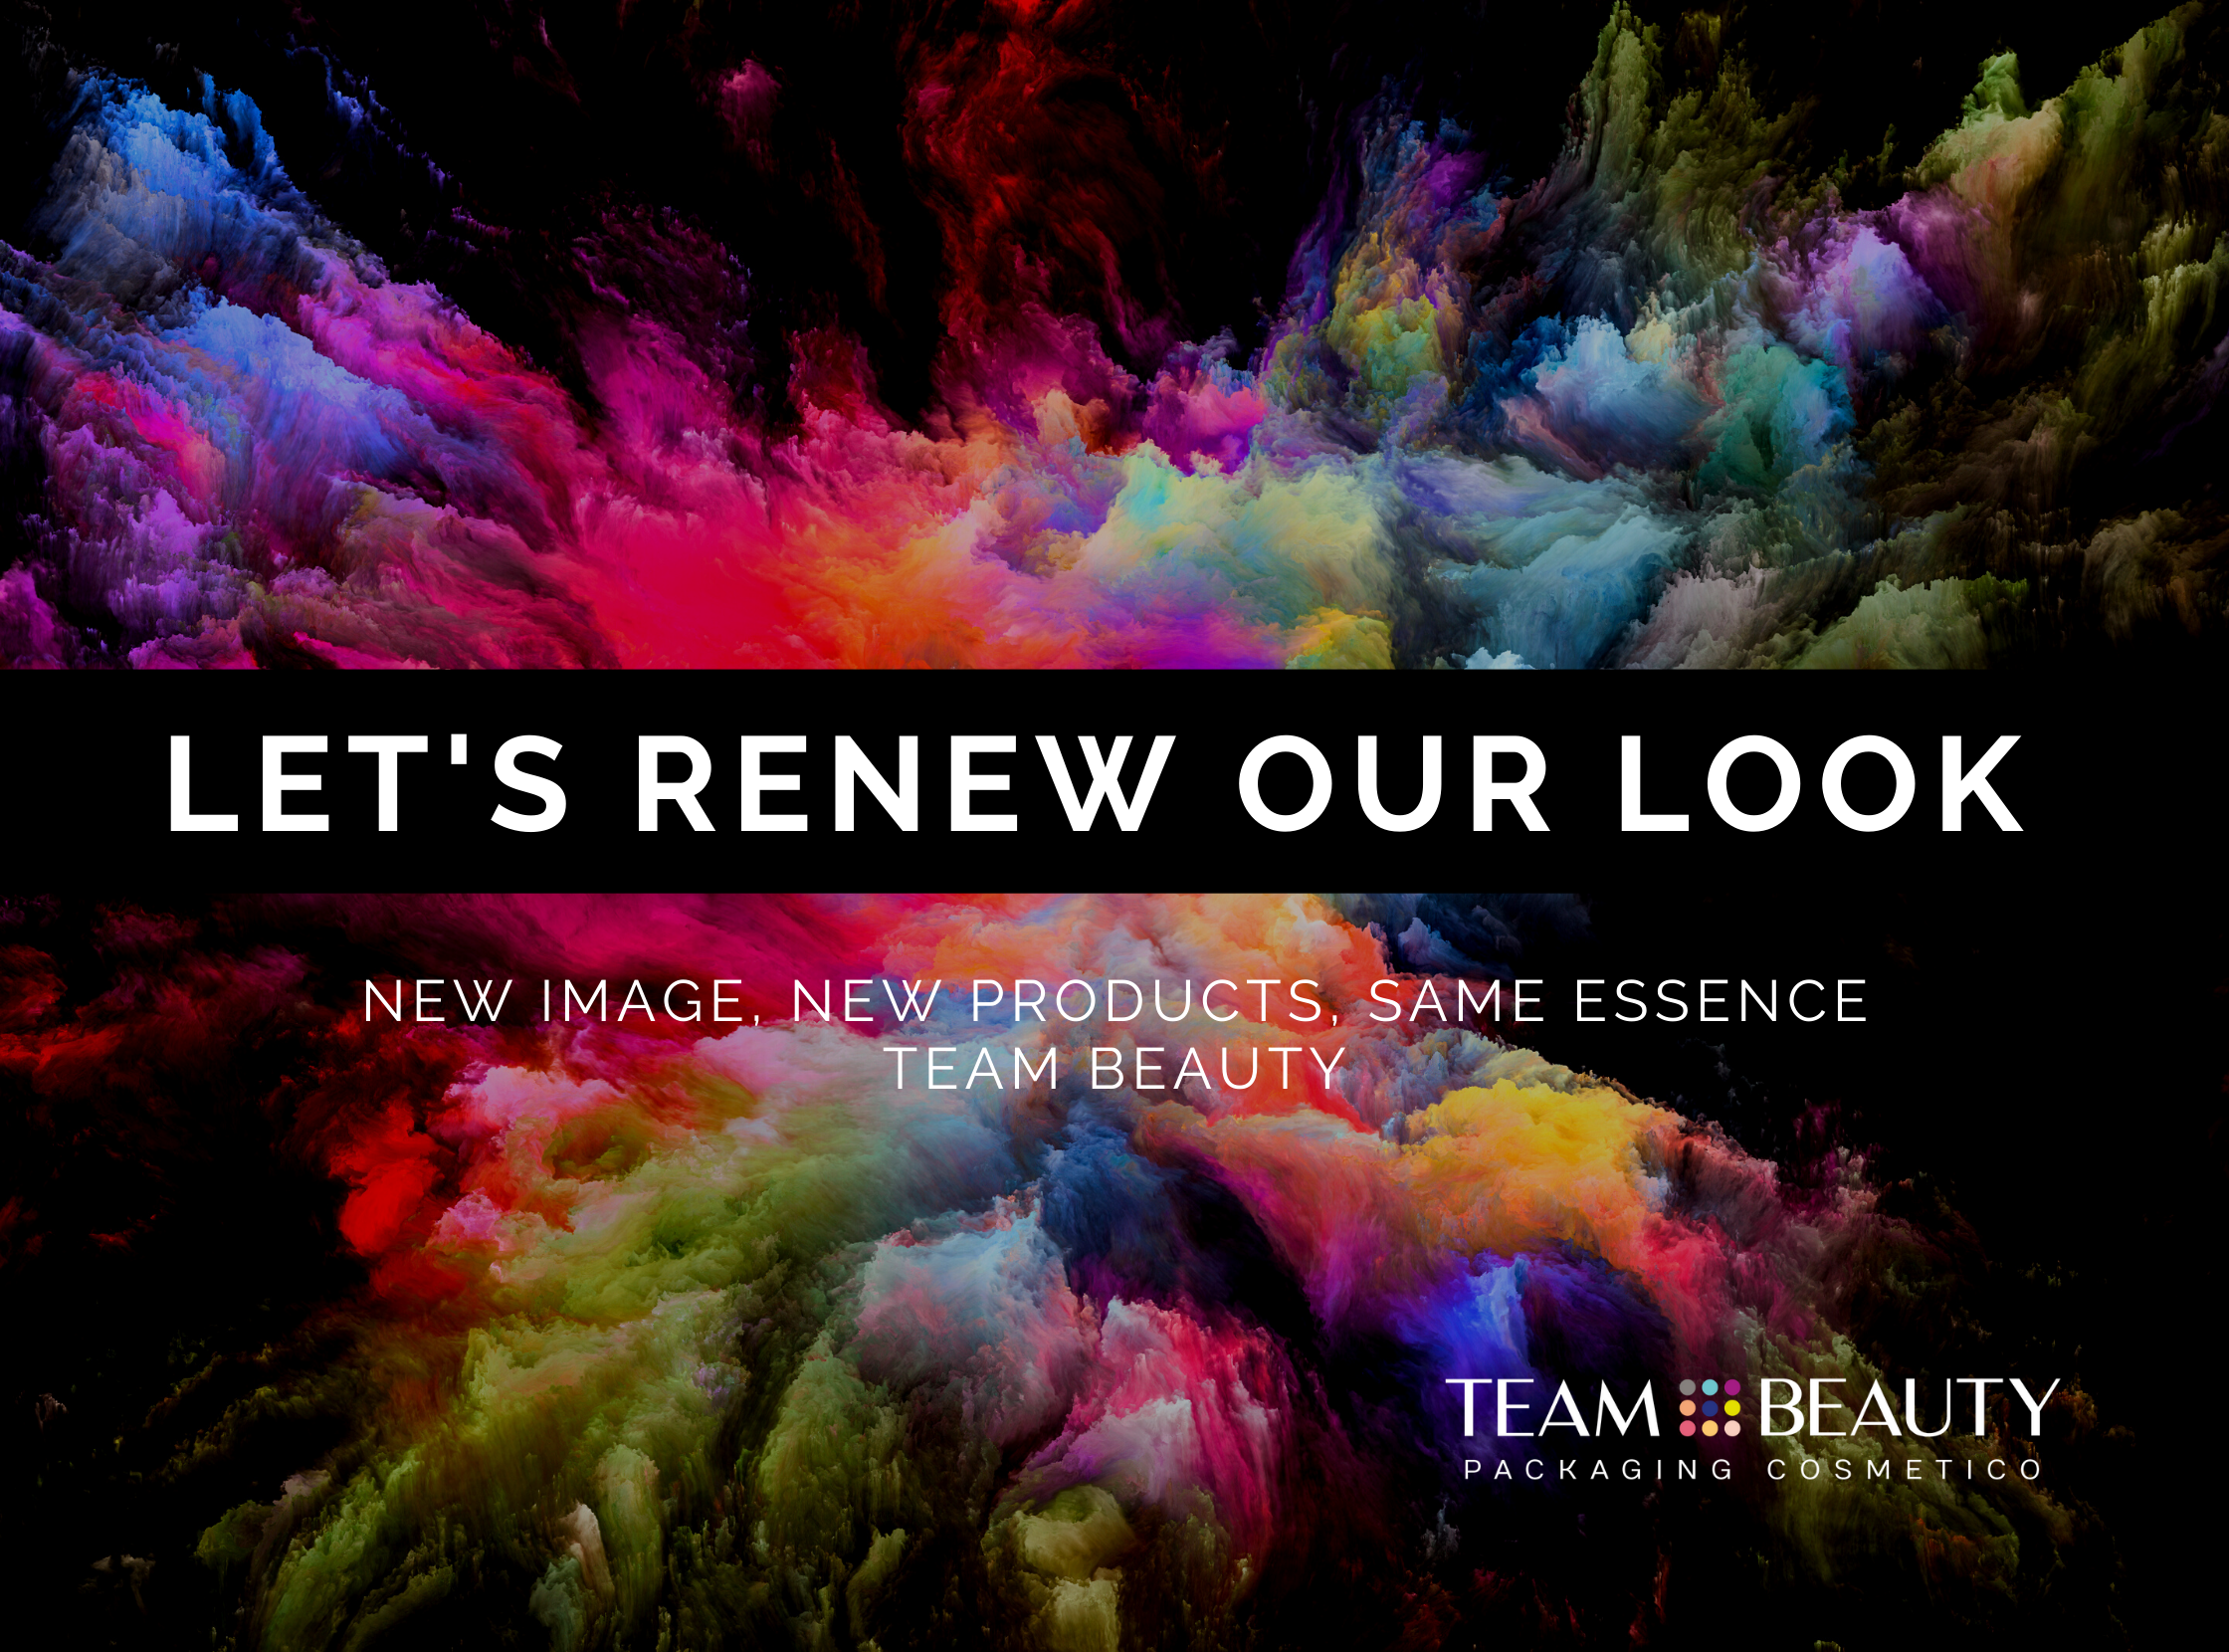 Team Beauty has a new look: new image, new products, same essence Team Beauty